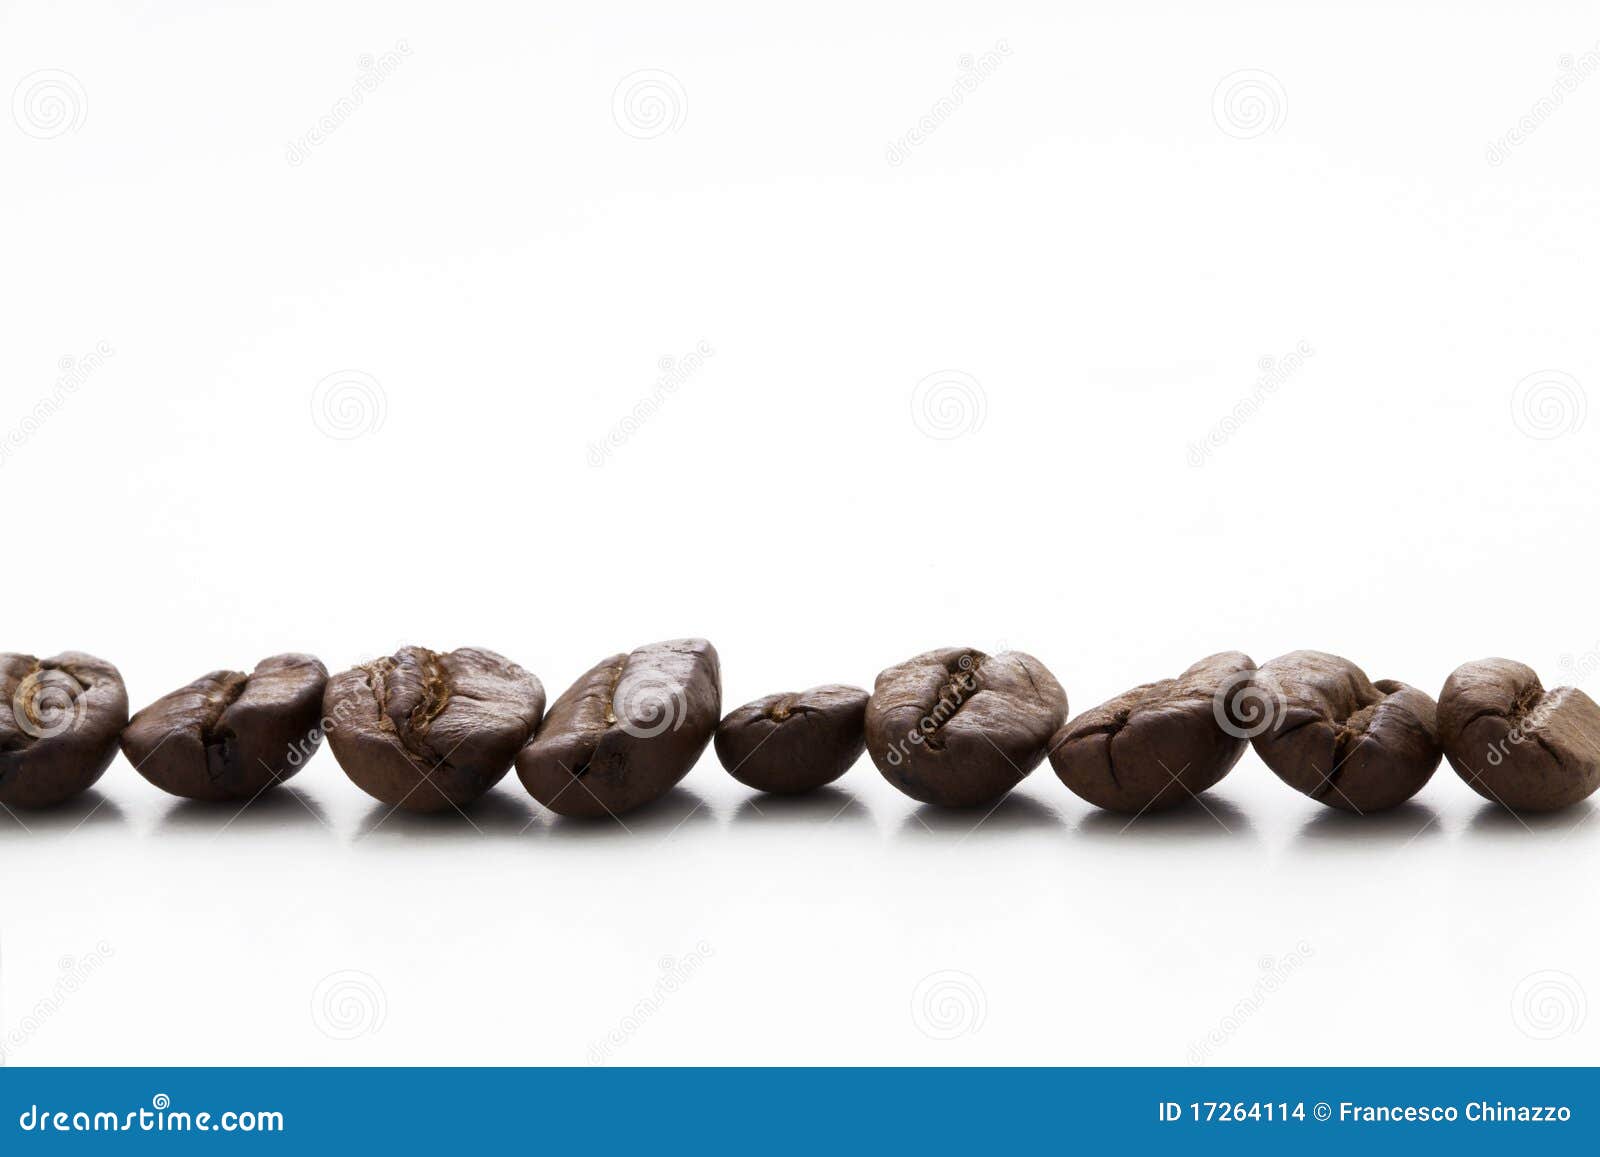 cofee beans caffe coffee  on white